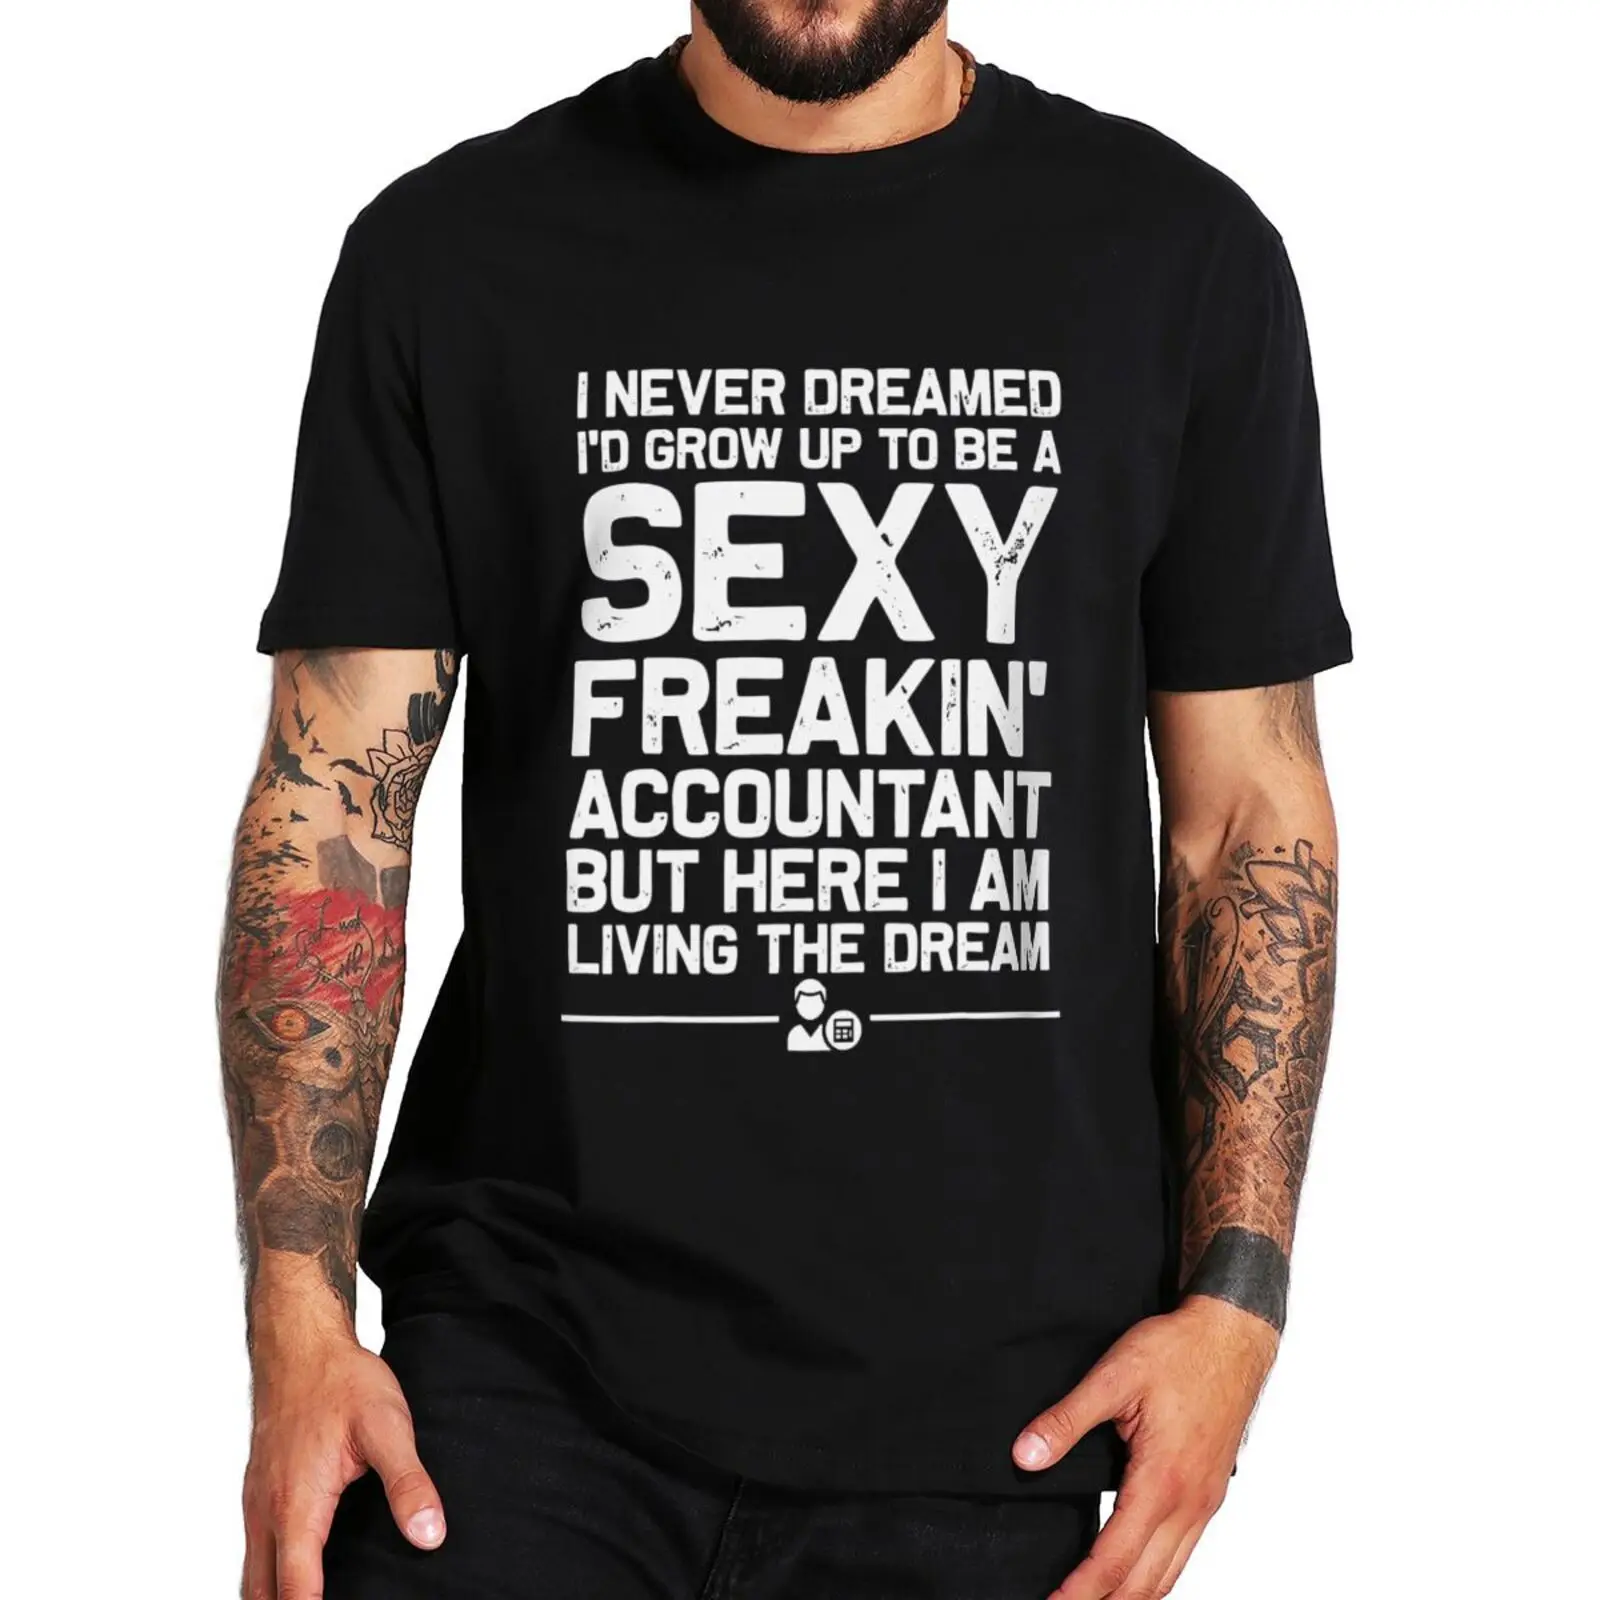 

I Never Dreamed I'd Grow Up To Be Sexy Accountant T-shirt Funny Accountant Art Gift Tee Tops Summer Casual Cotton Unisex T Shirt